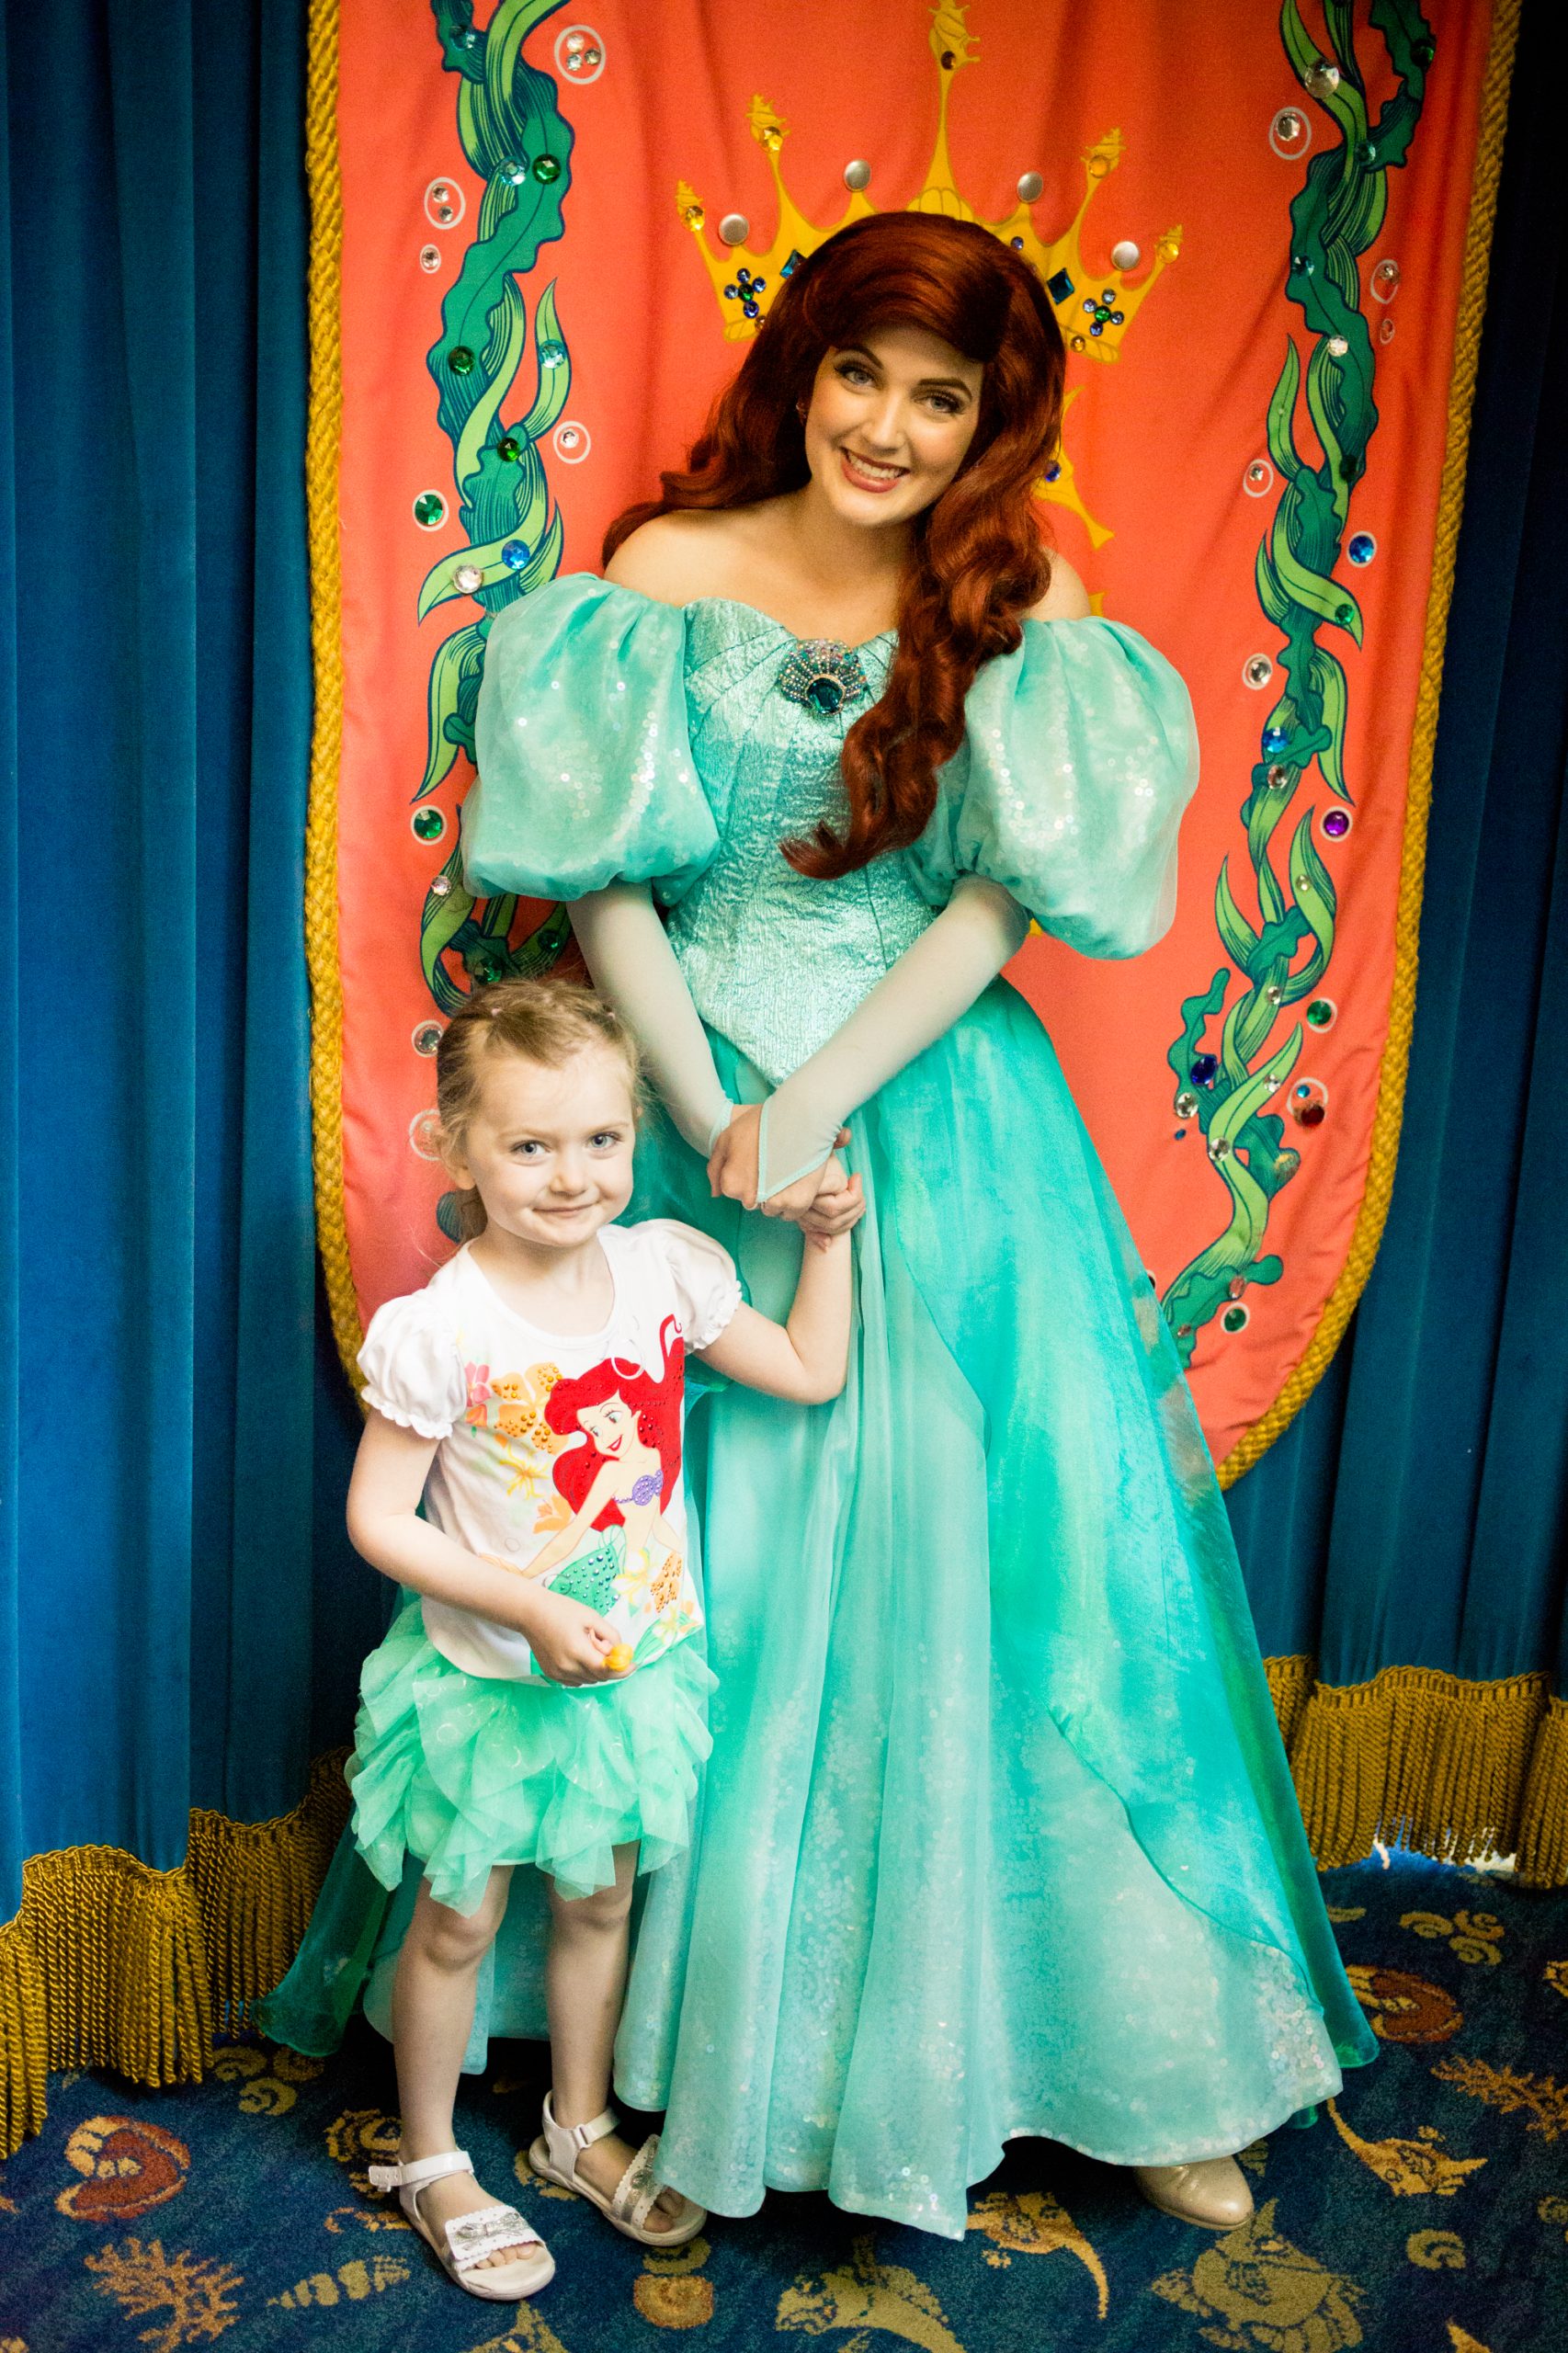 A young girl poses with Ariel.